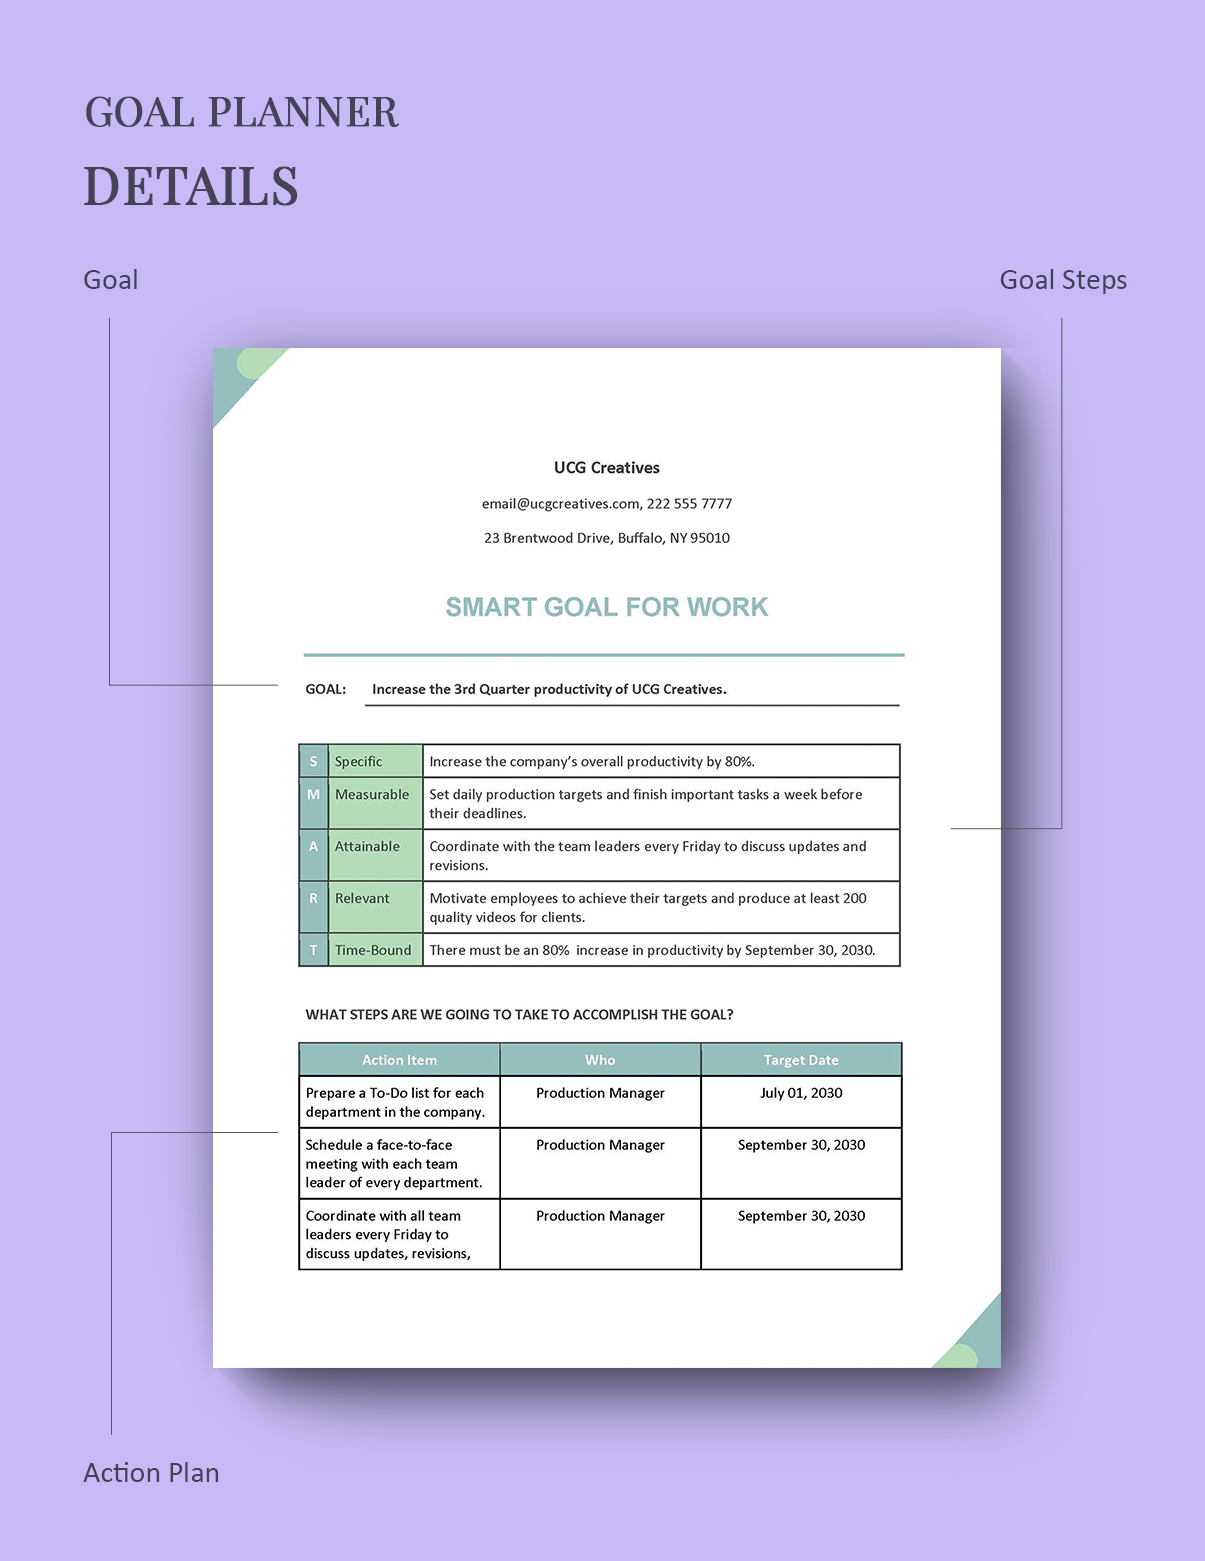 Smart Goals Examples For Work Template